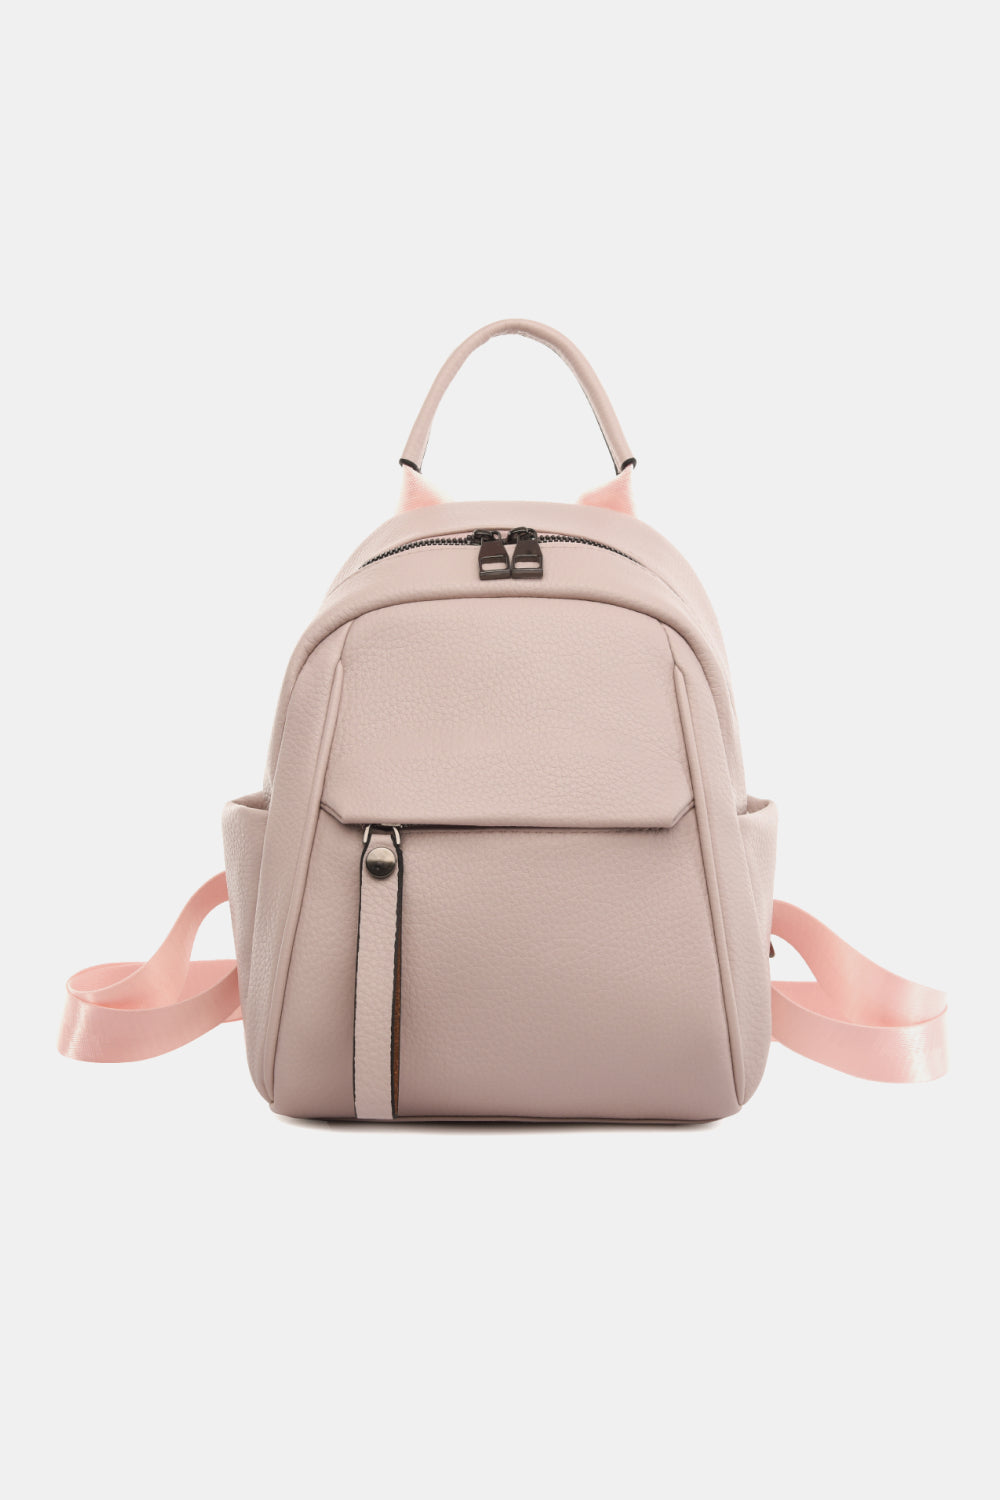 Small PU Leather Backpack - AllIn Computer